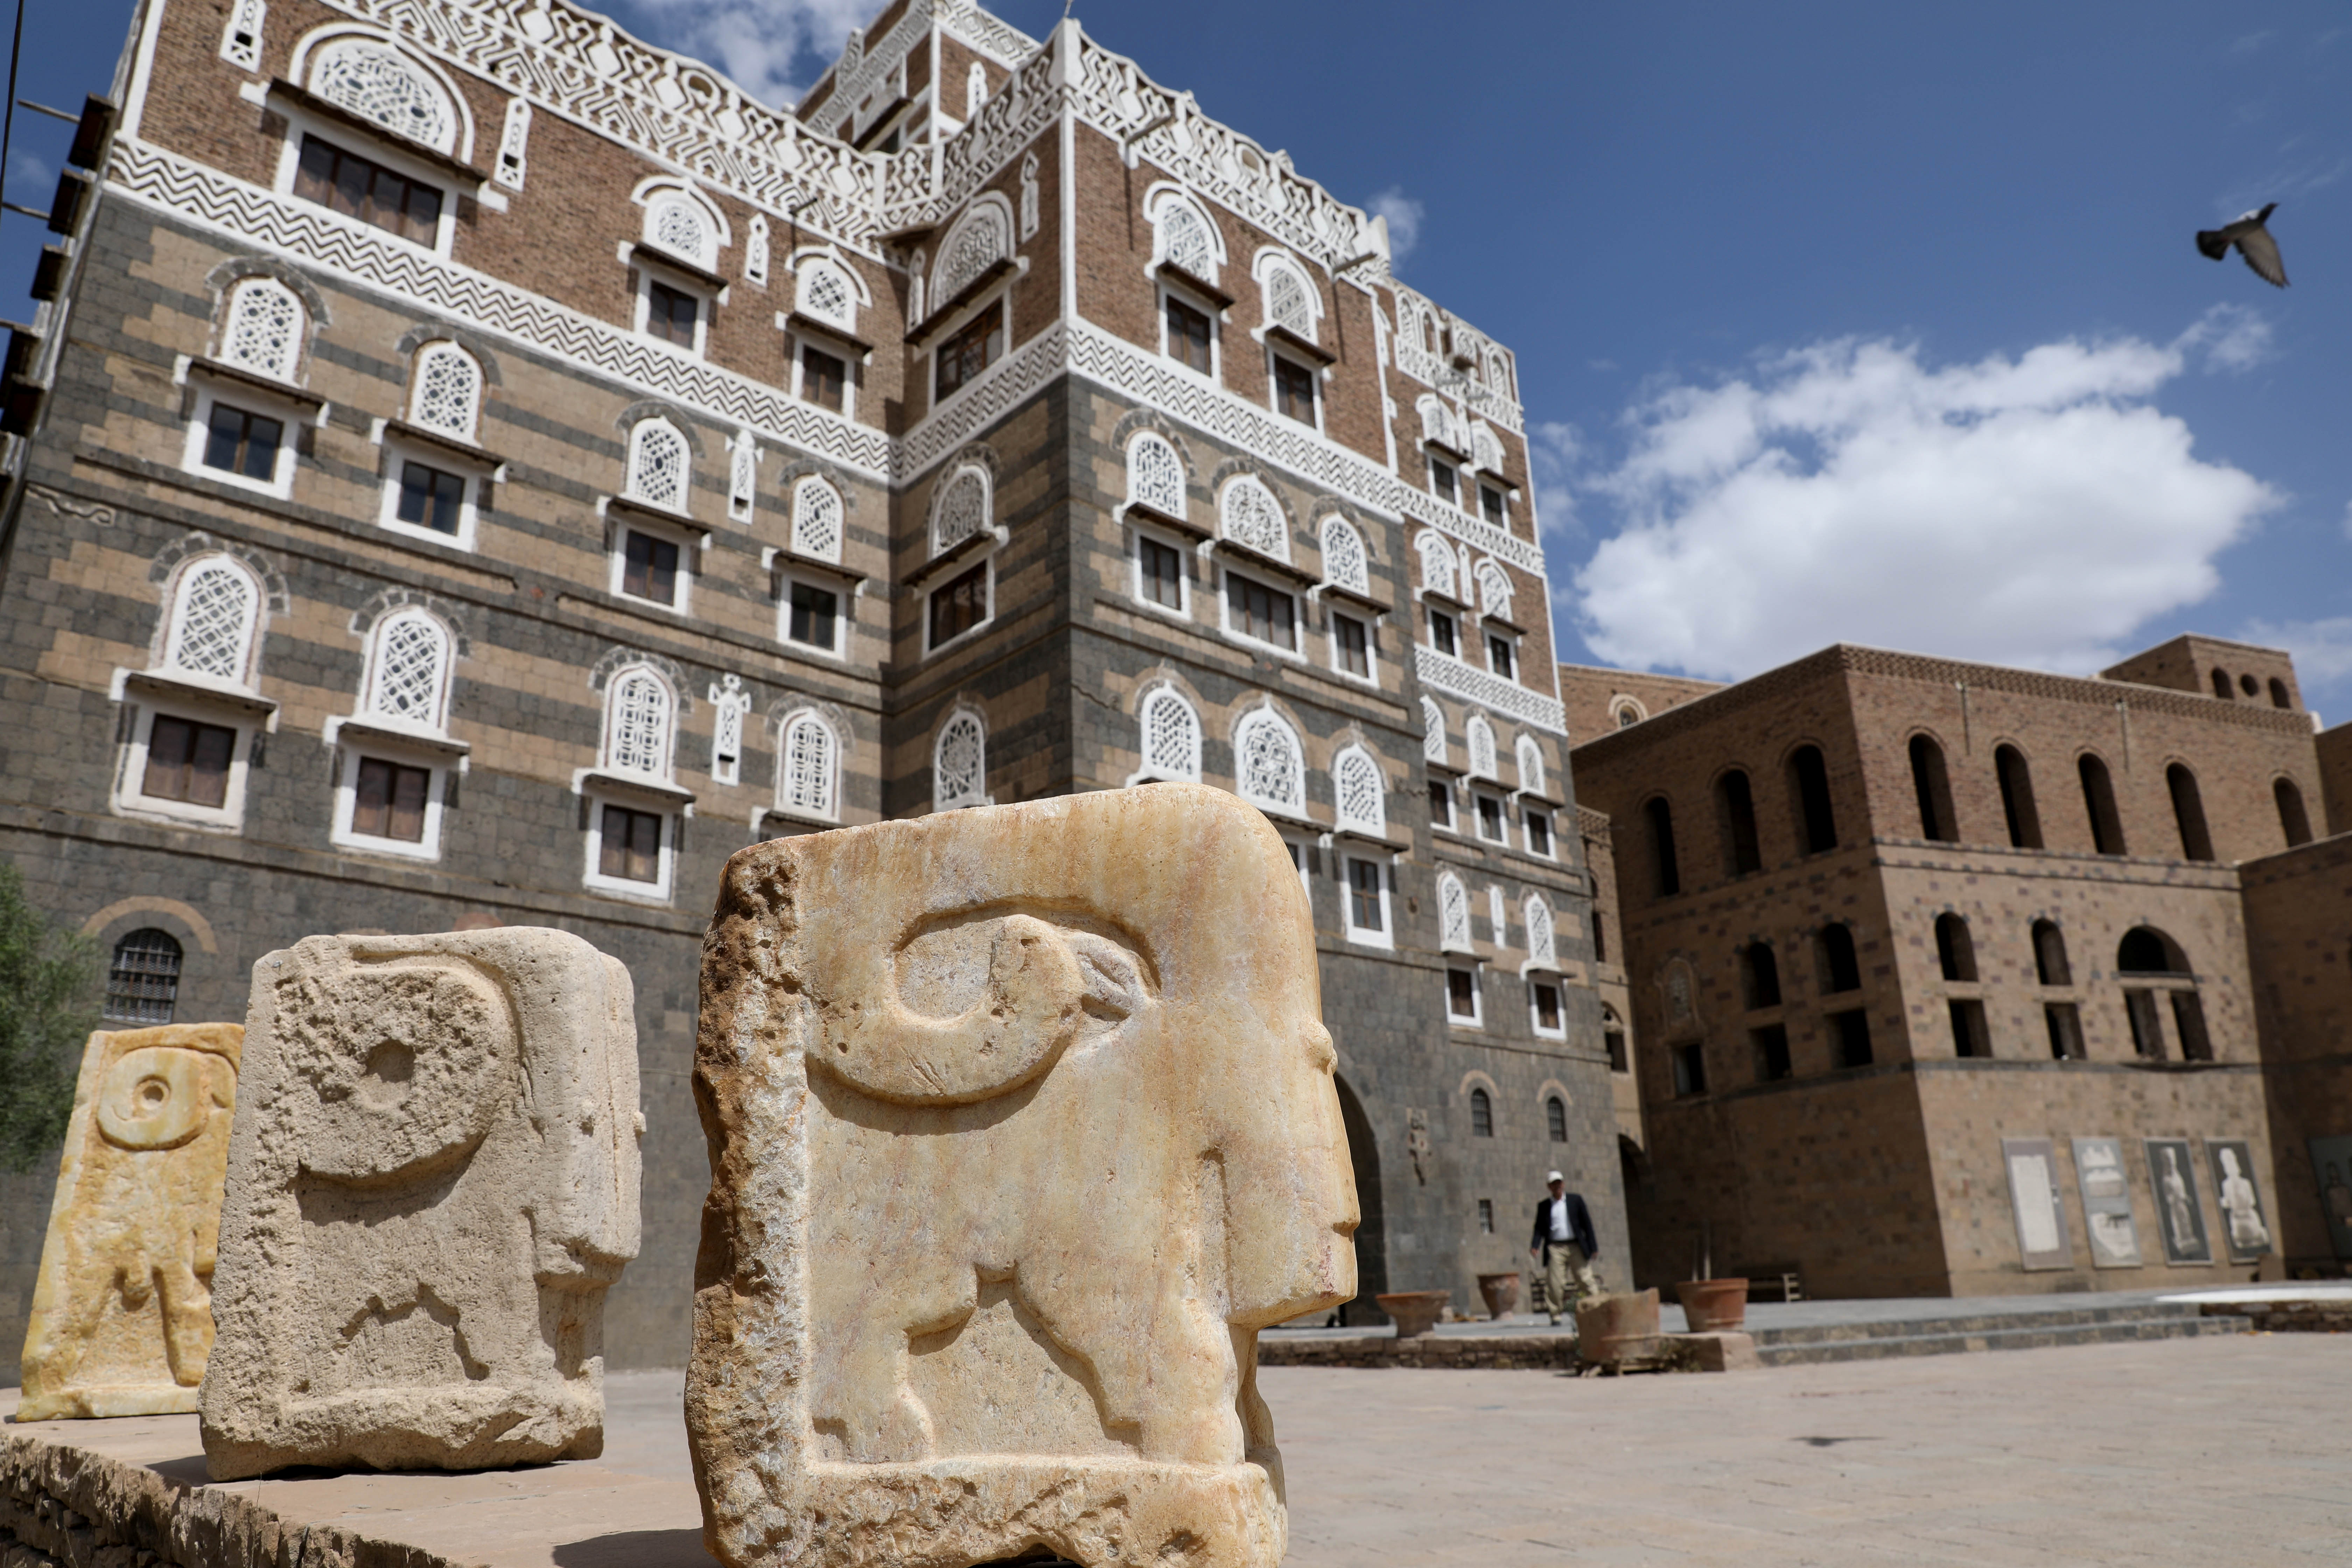 Statues are seen at the yard of the National Museum in Sanaa, Yemen June 2, 2021. Picture taken June 2, 2021. REUTERS/Khaled Abdullah